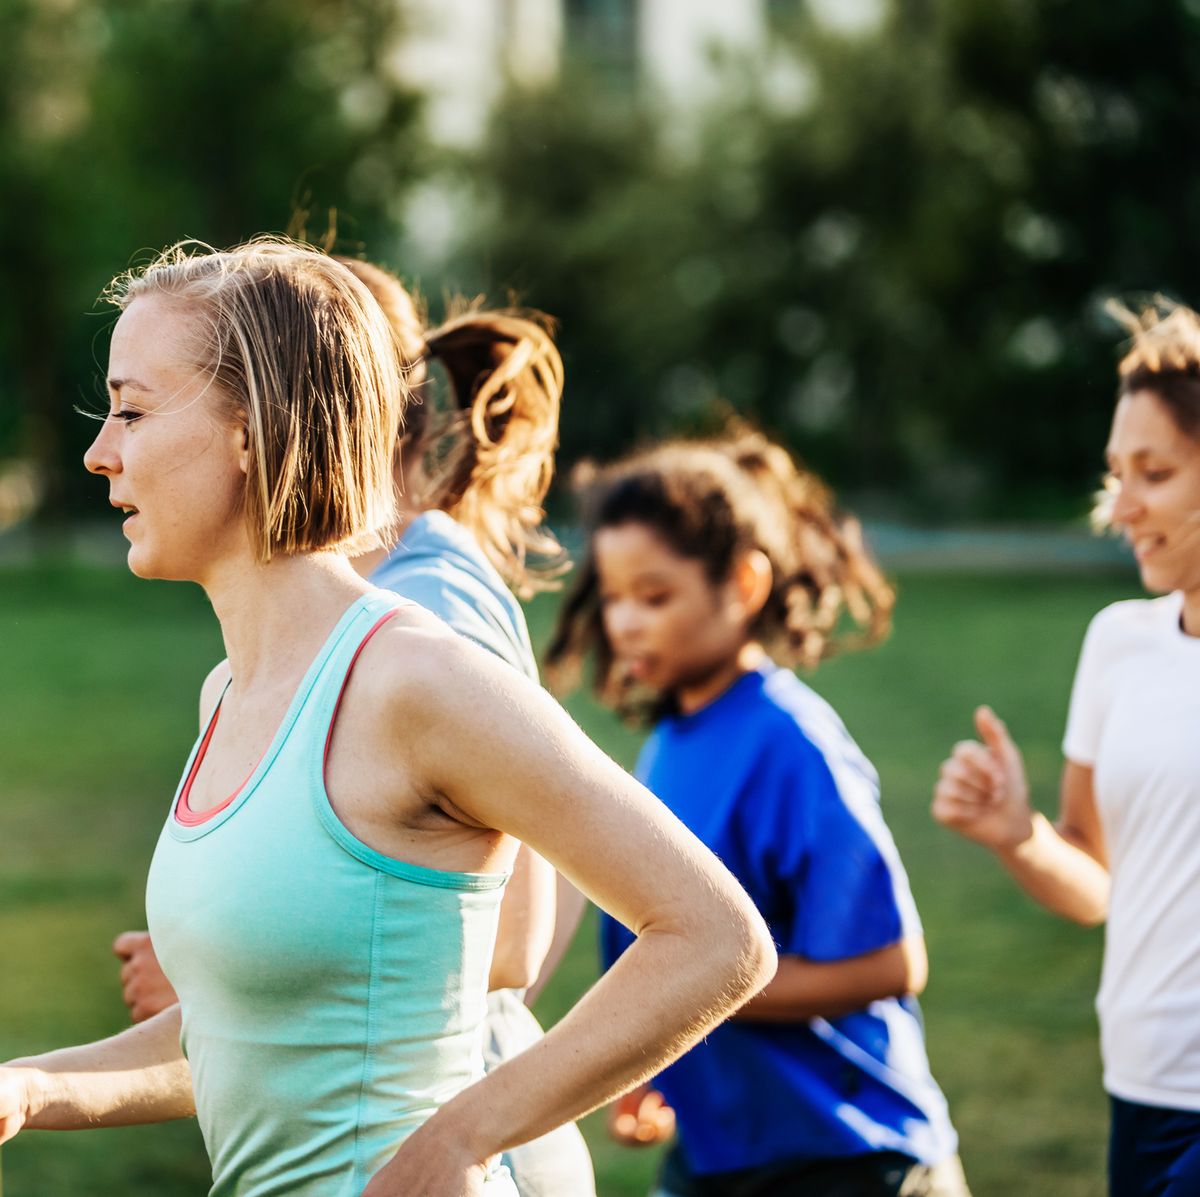 group of women out running together, training during menstrual cycle